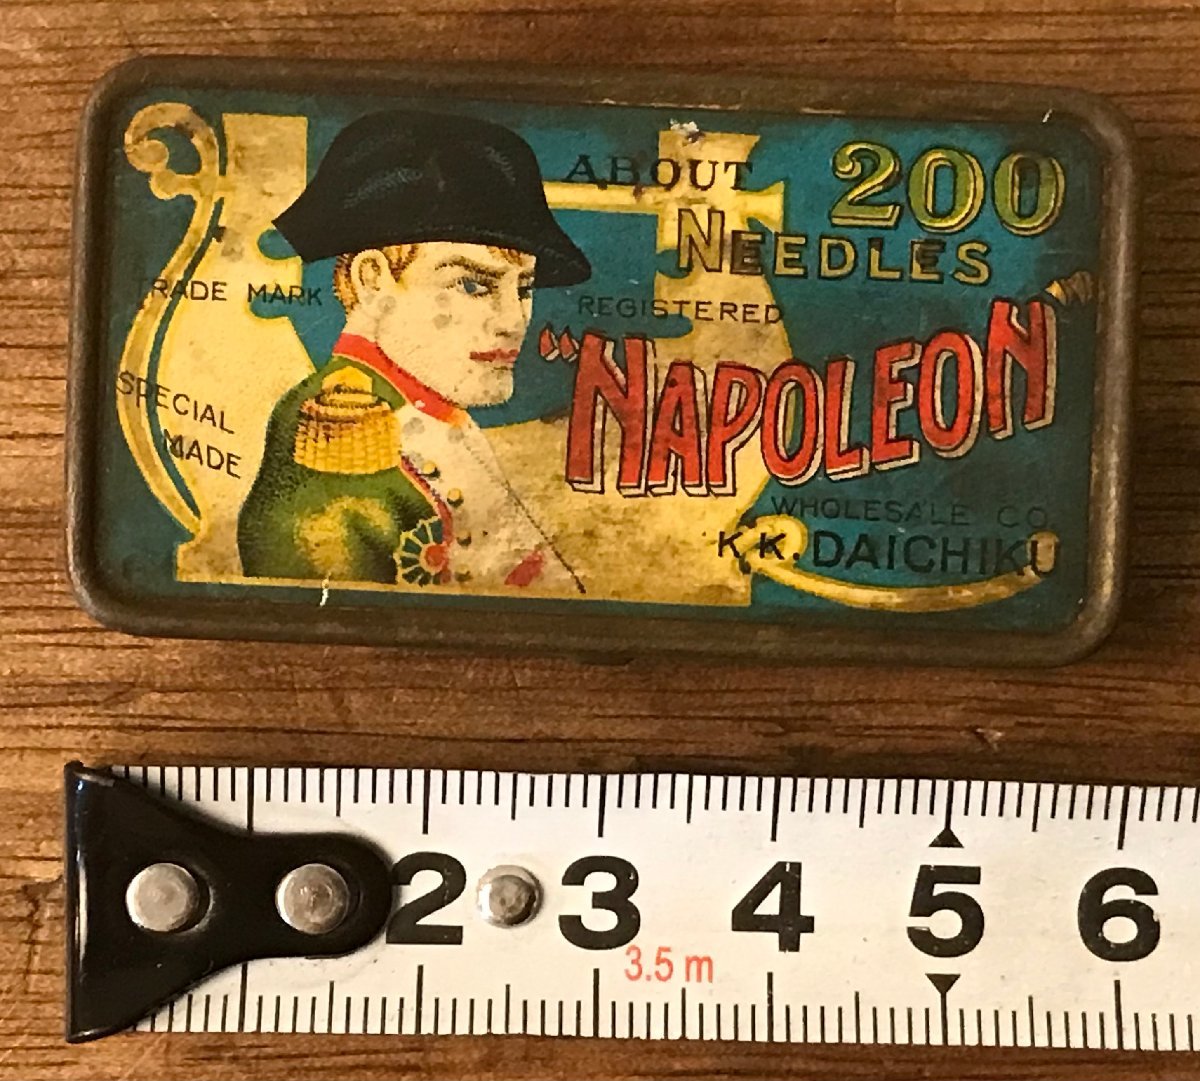 SS-1121# including carriage # gramophone needle 200 needle Napoleon large .K K.DAICHIKU tin plate case container antique retro 35g/.AT.